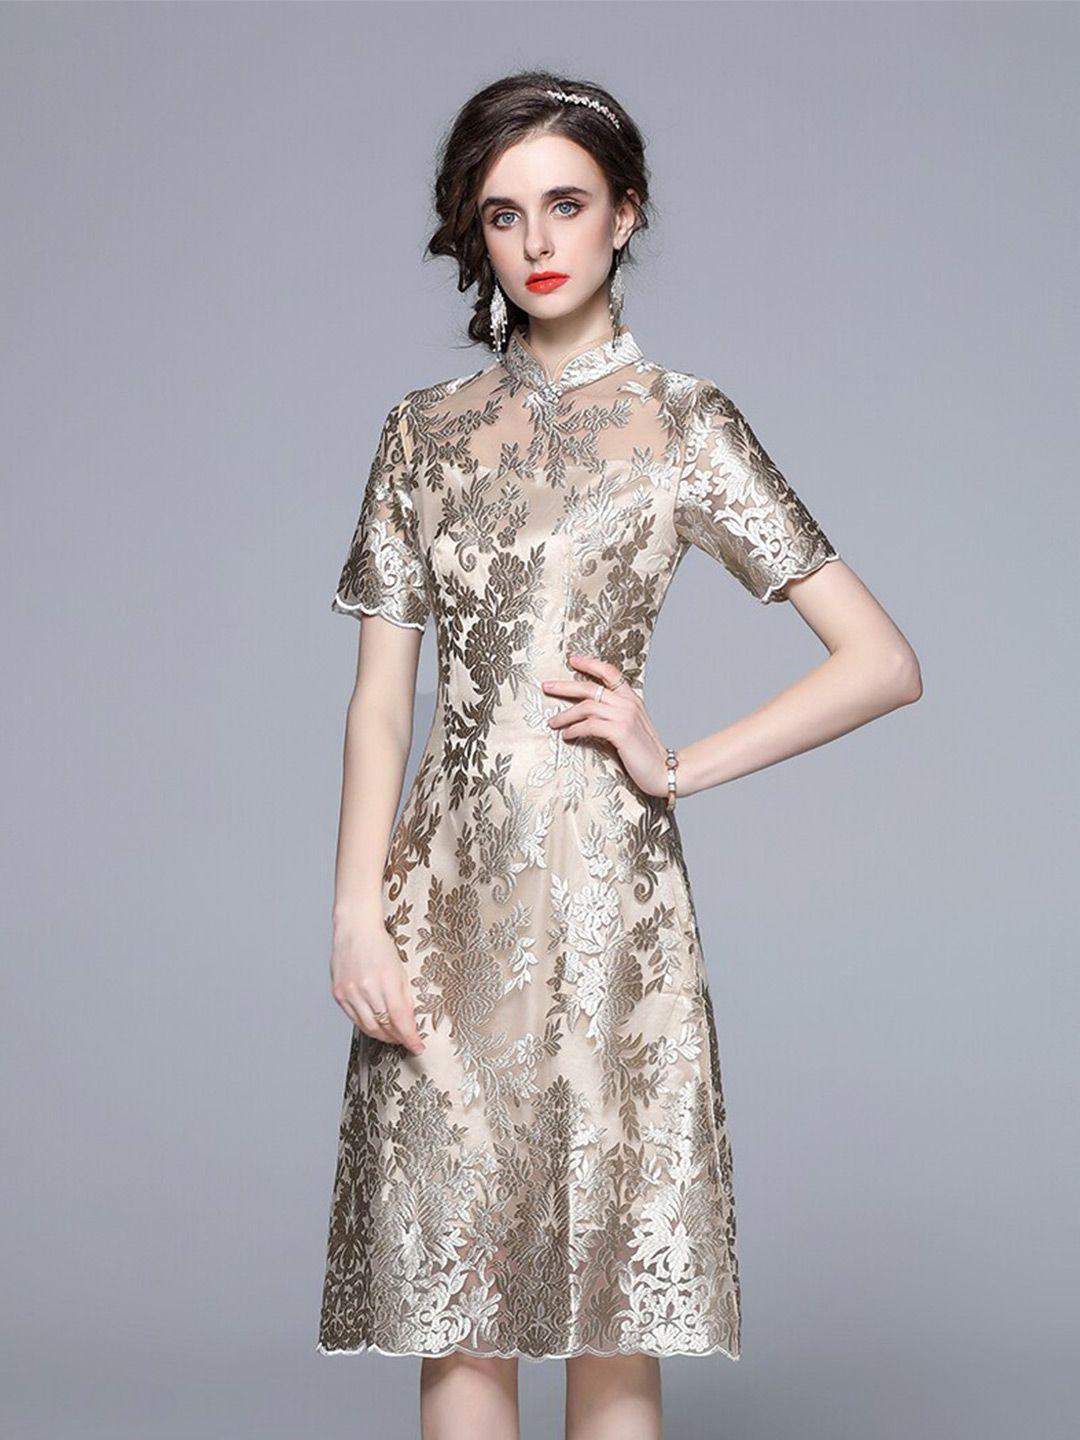 jc collection grey floral dress